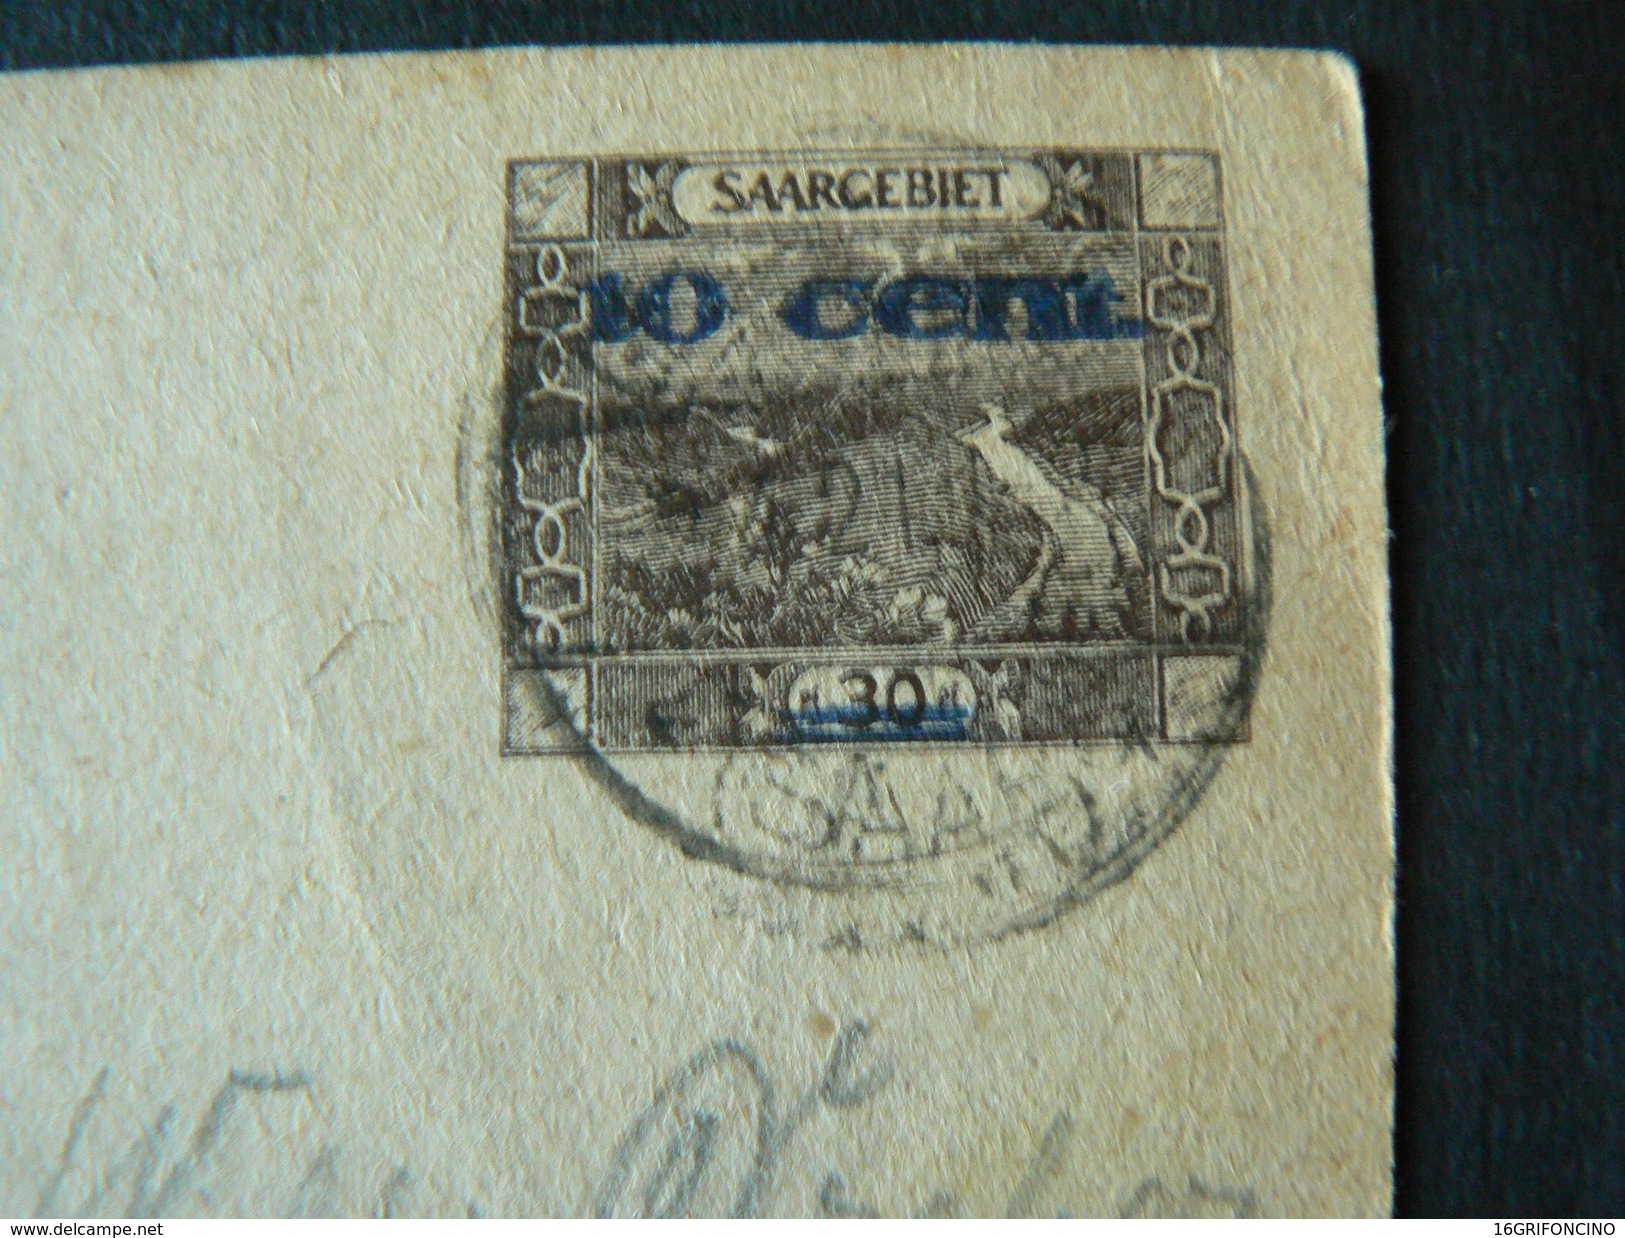 3 ANCIENT POSTKARTE OF GERMANY WITH STAMP...ONLY ONE USED...VERY NICE..//.ANTICHE CARTE POSTALI.TIMBRATE.